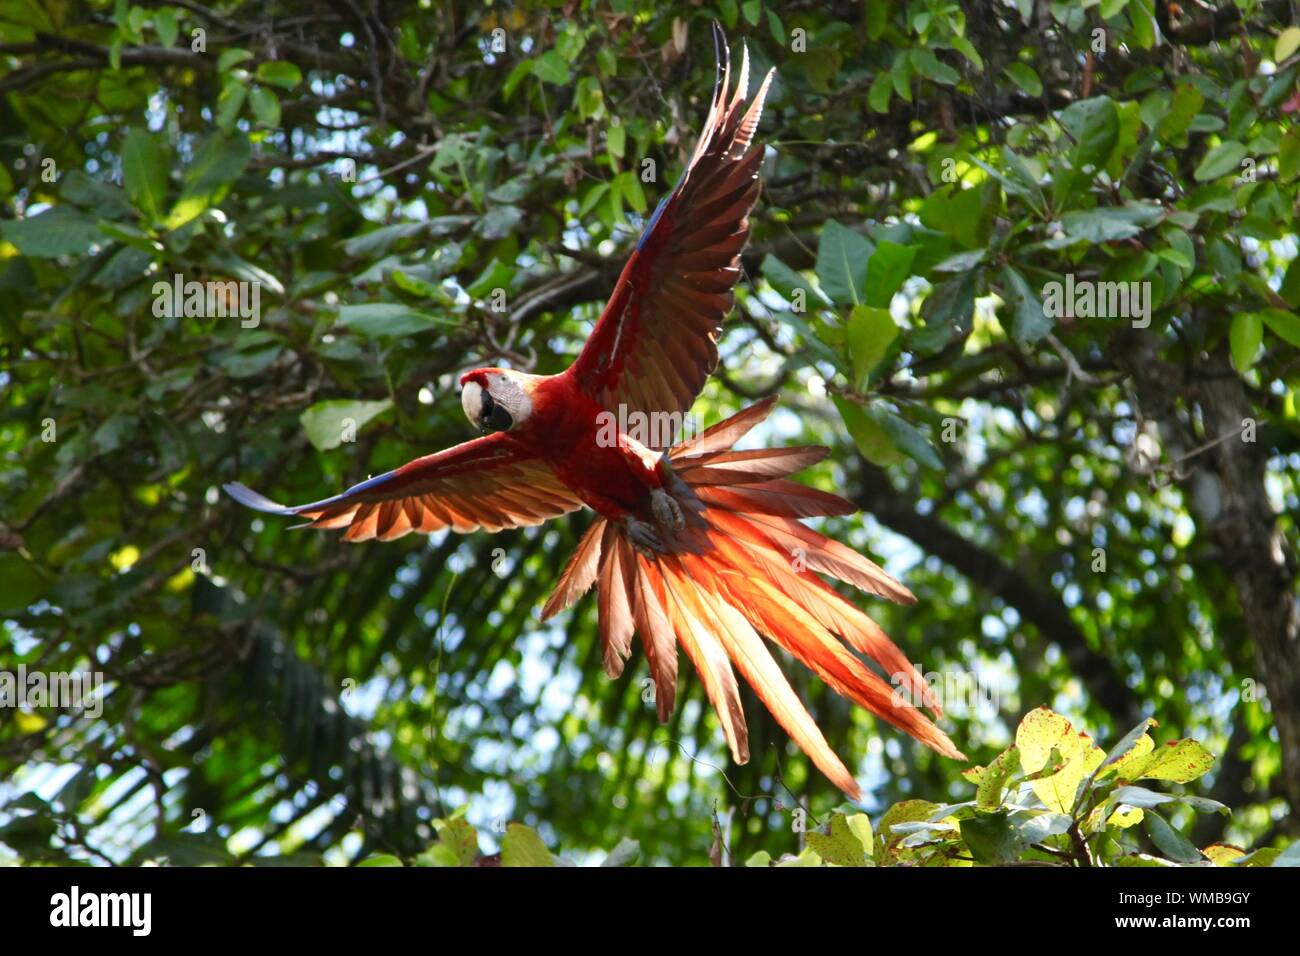 Low Angle View Of Scarlet Macaw Flying Against Trees Stock Photo